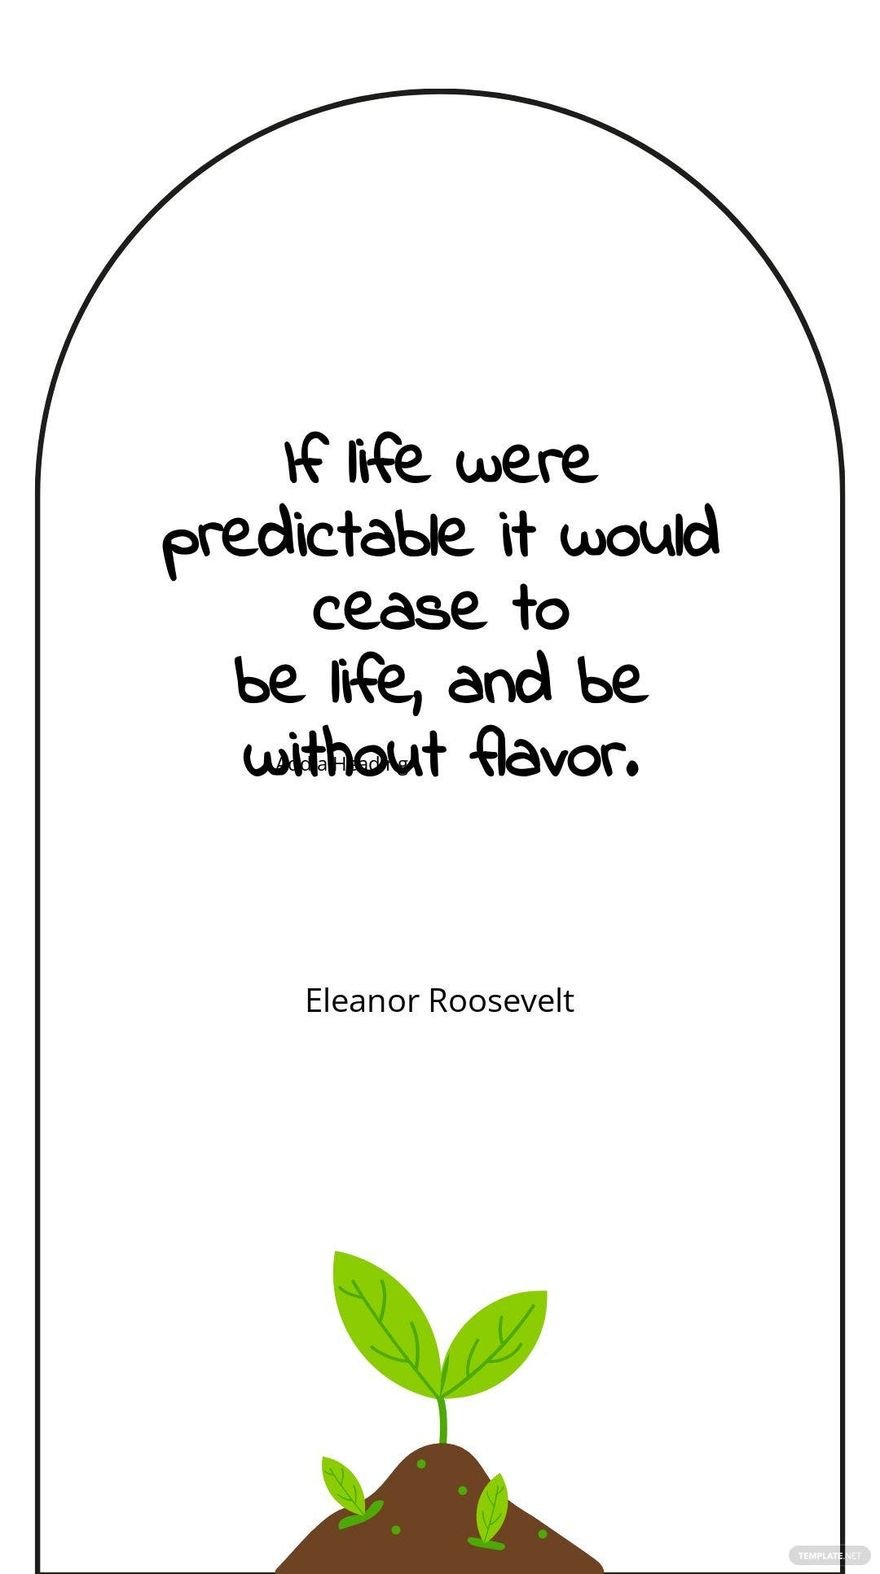 Eleanor Roosevelt - "If life were predictable it would cease to be life, and be without flavor."